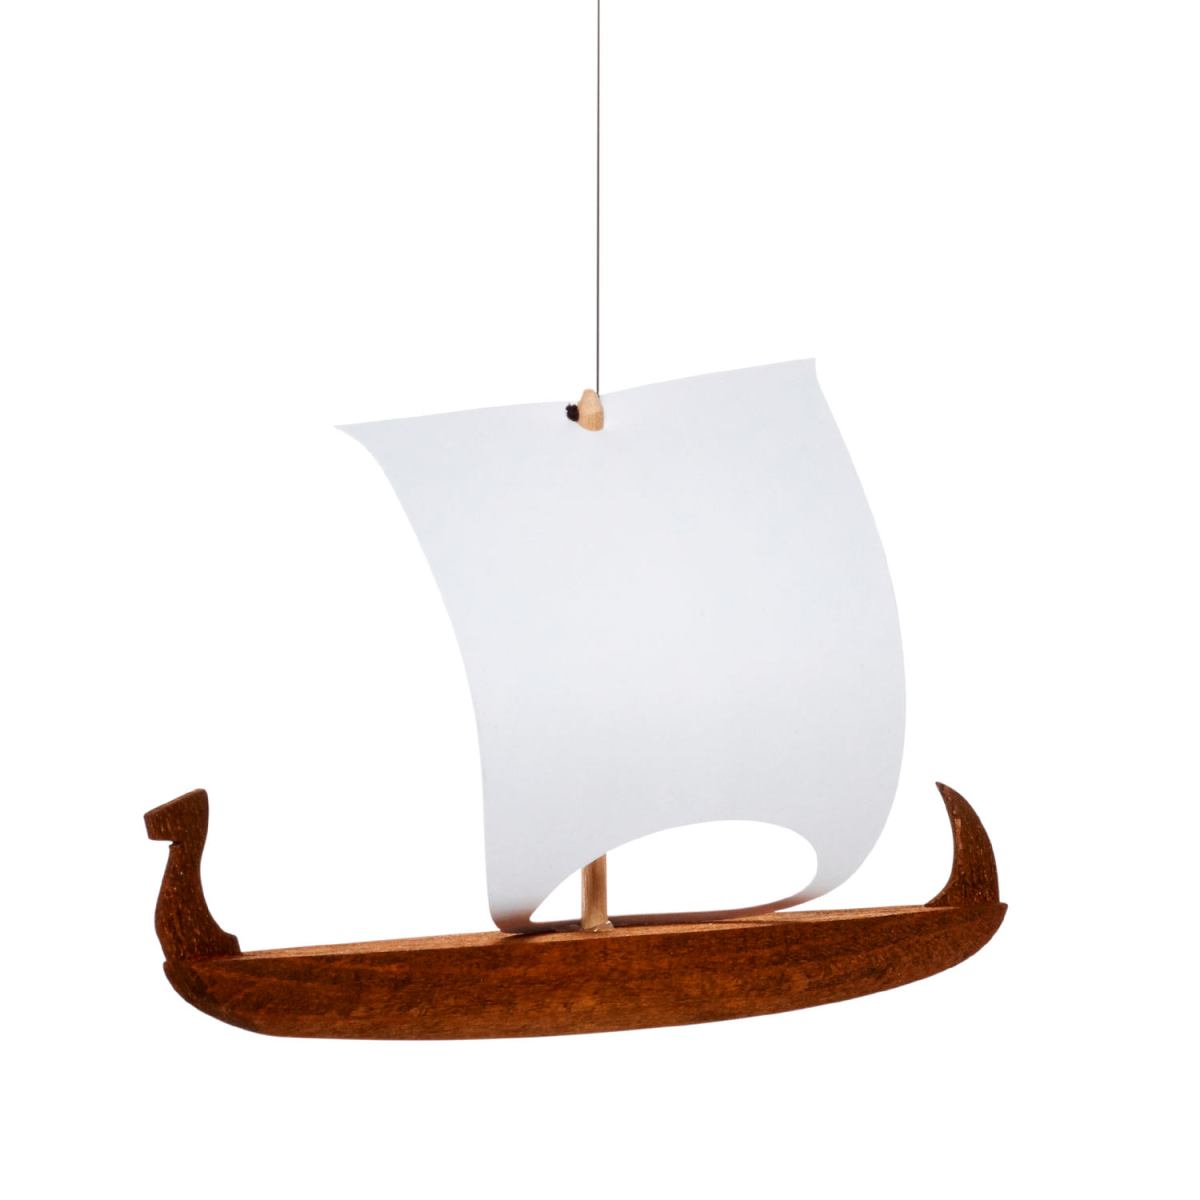 Children's Mobile "Viking" with Five Teak Wood Ships